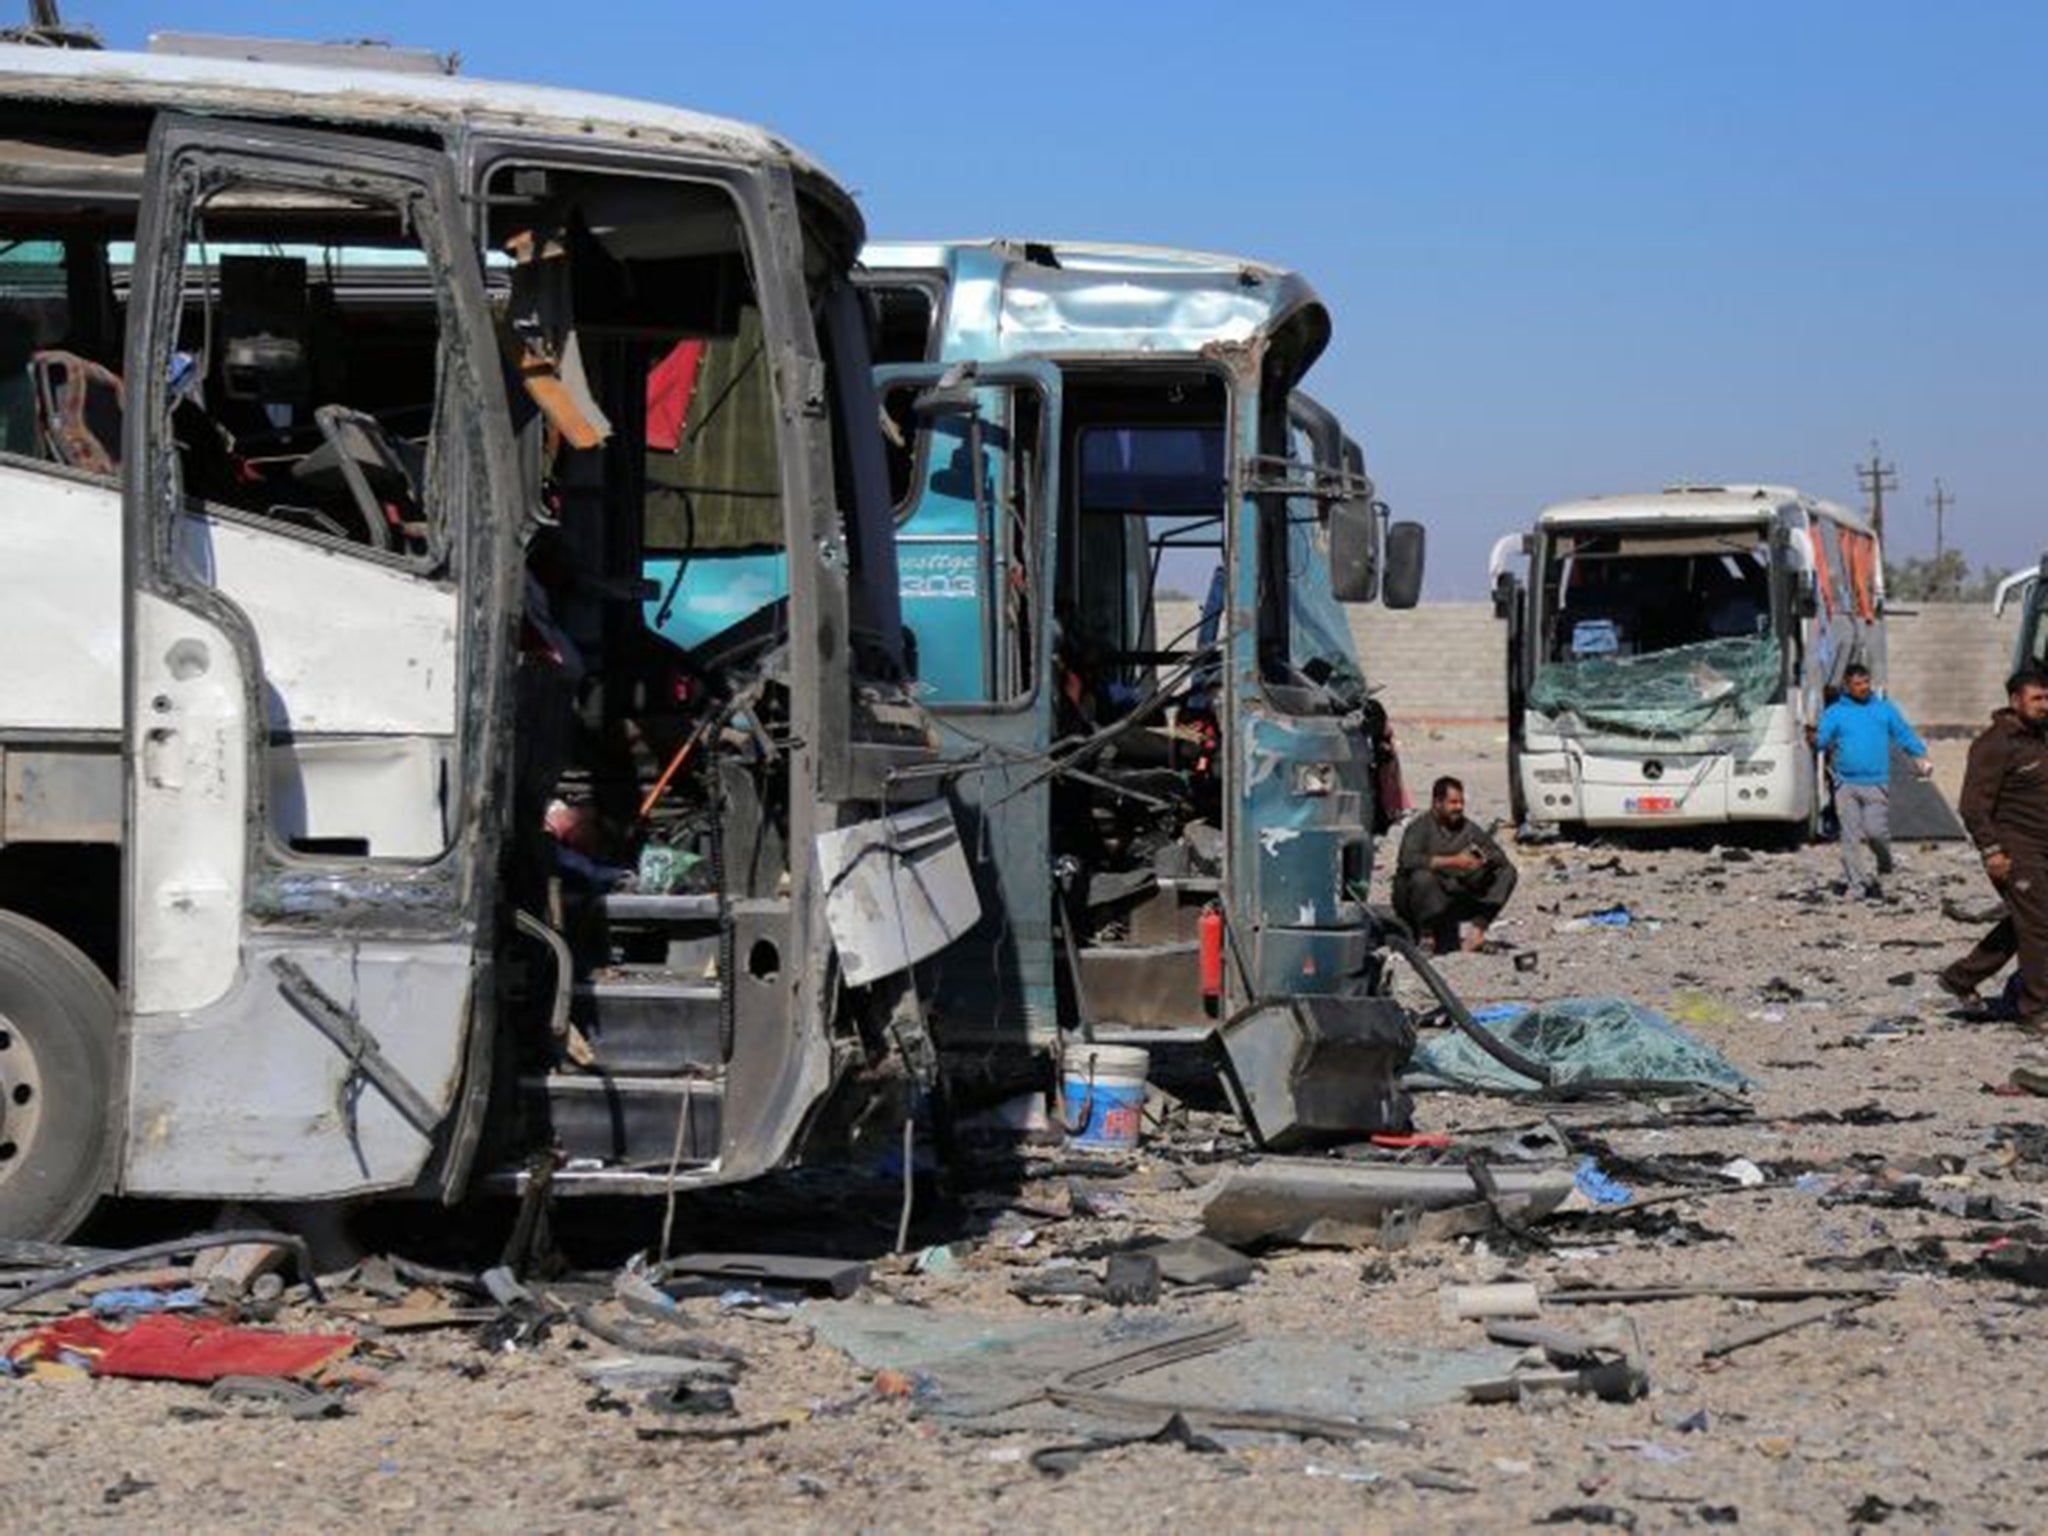 One of the ambulances was detonated in the holy city of Samarra, 70 miles north of Baghdad